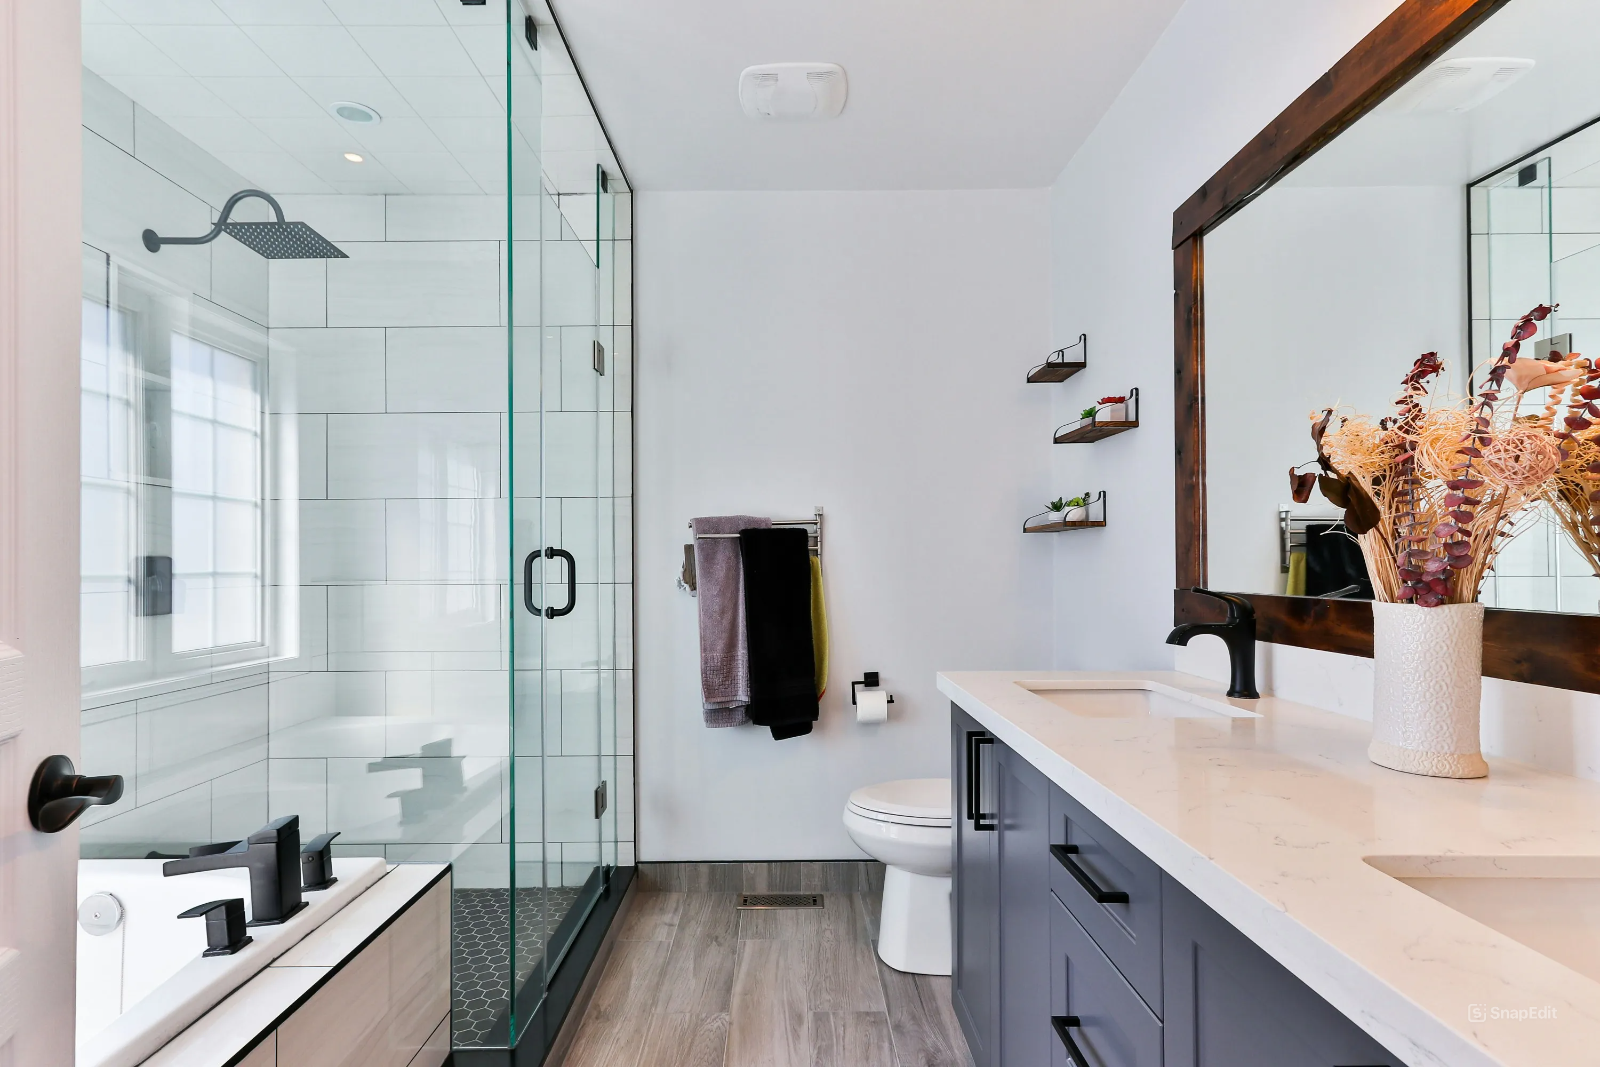 The Basics to a Clean and Organised Bathroom